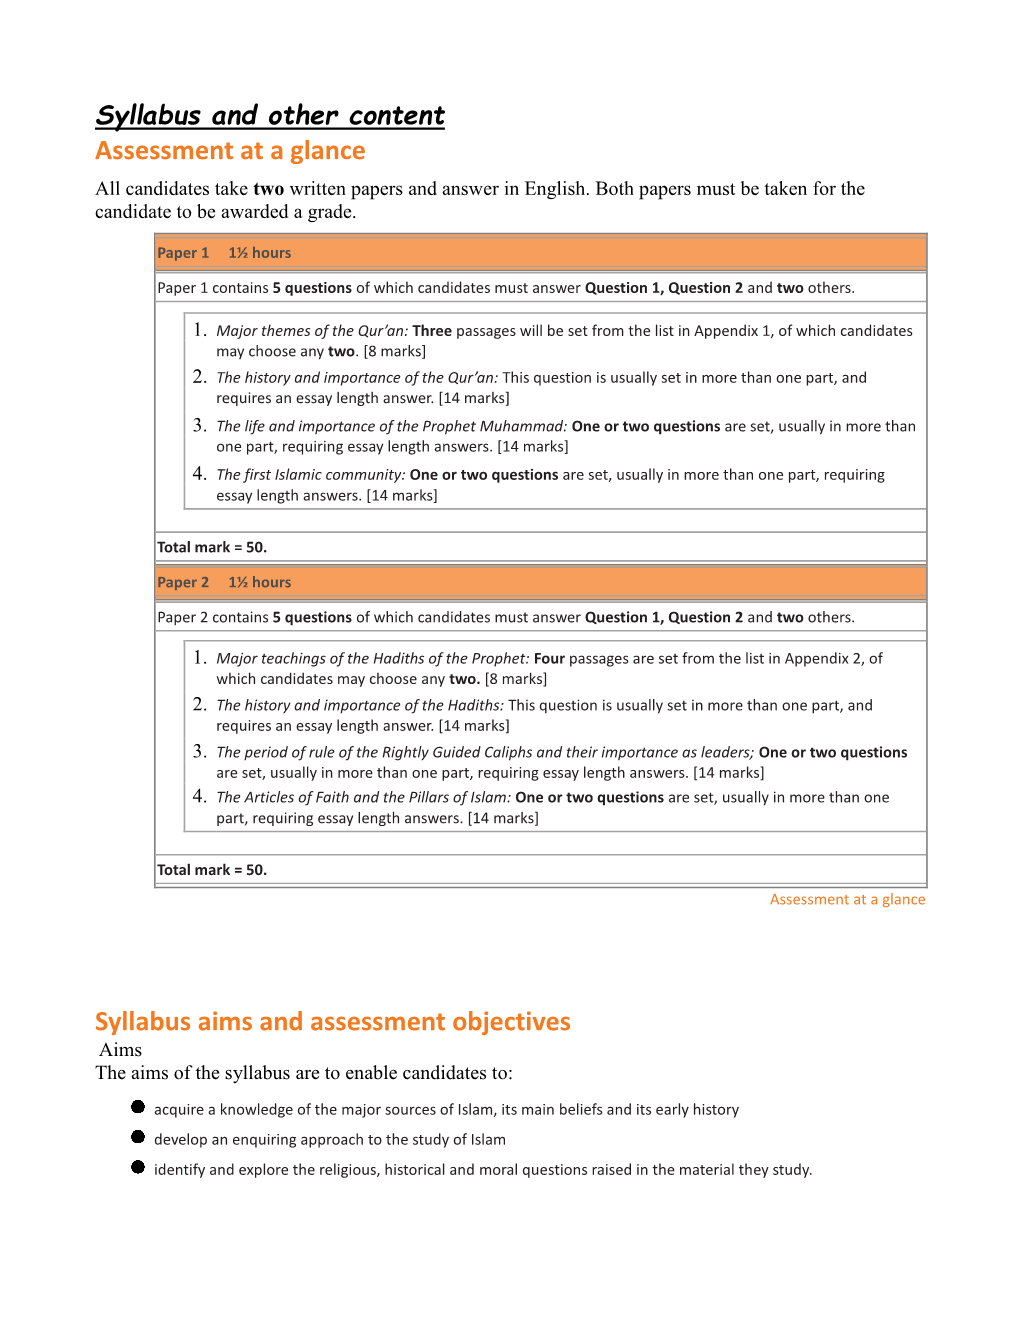 Assessment at a Glance Syllabus Aims and Assessment Objectives